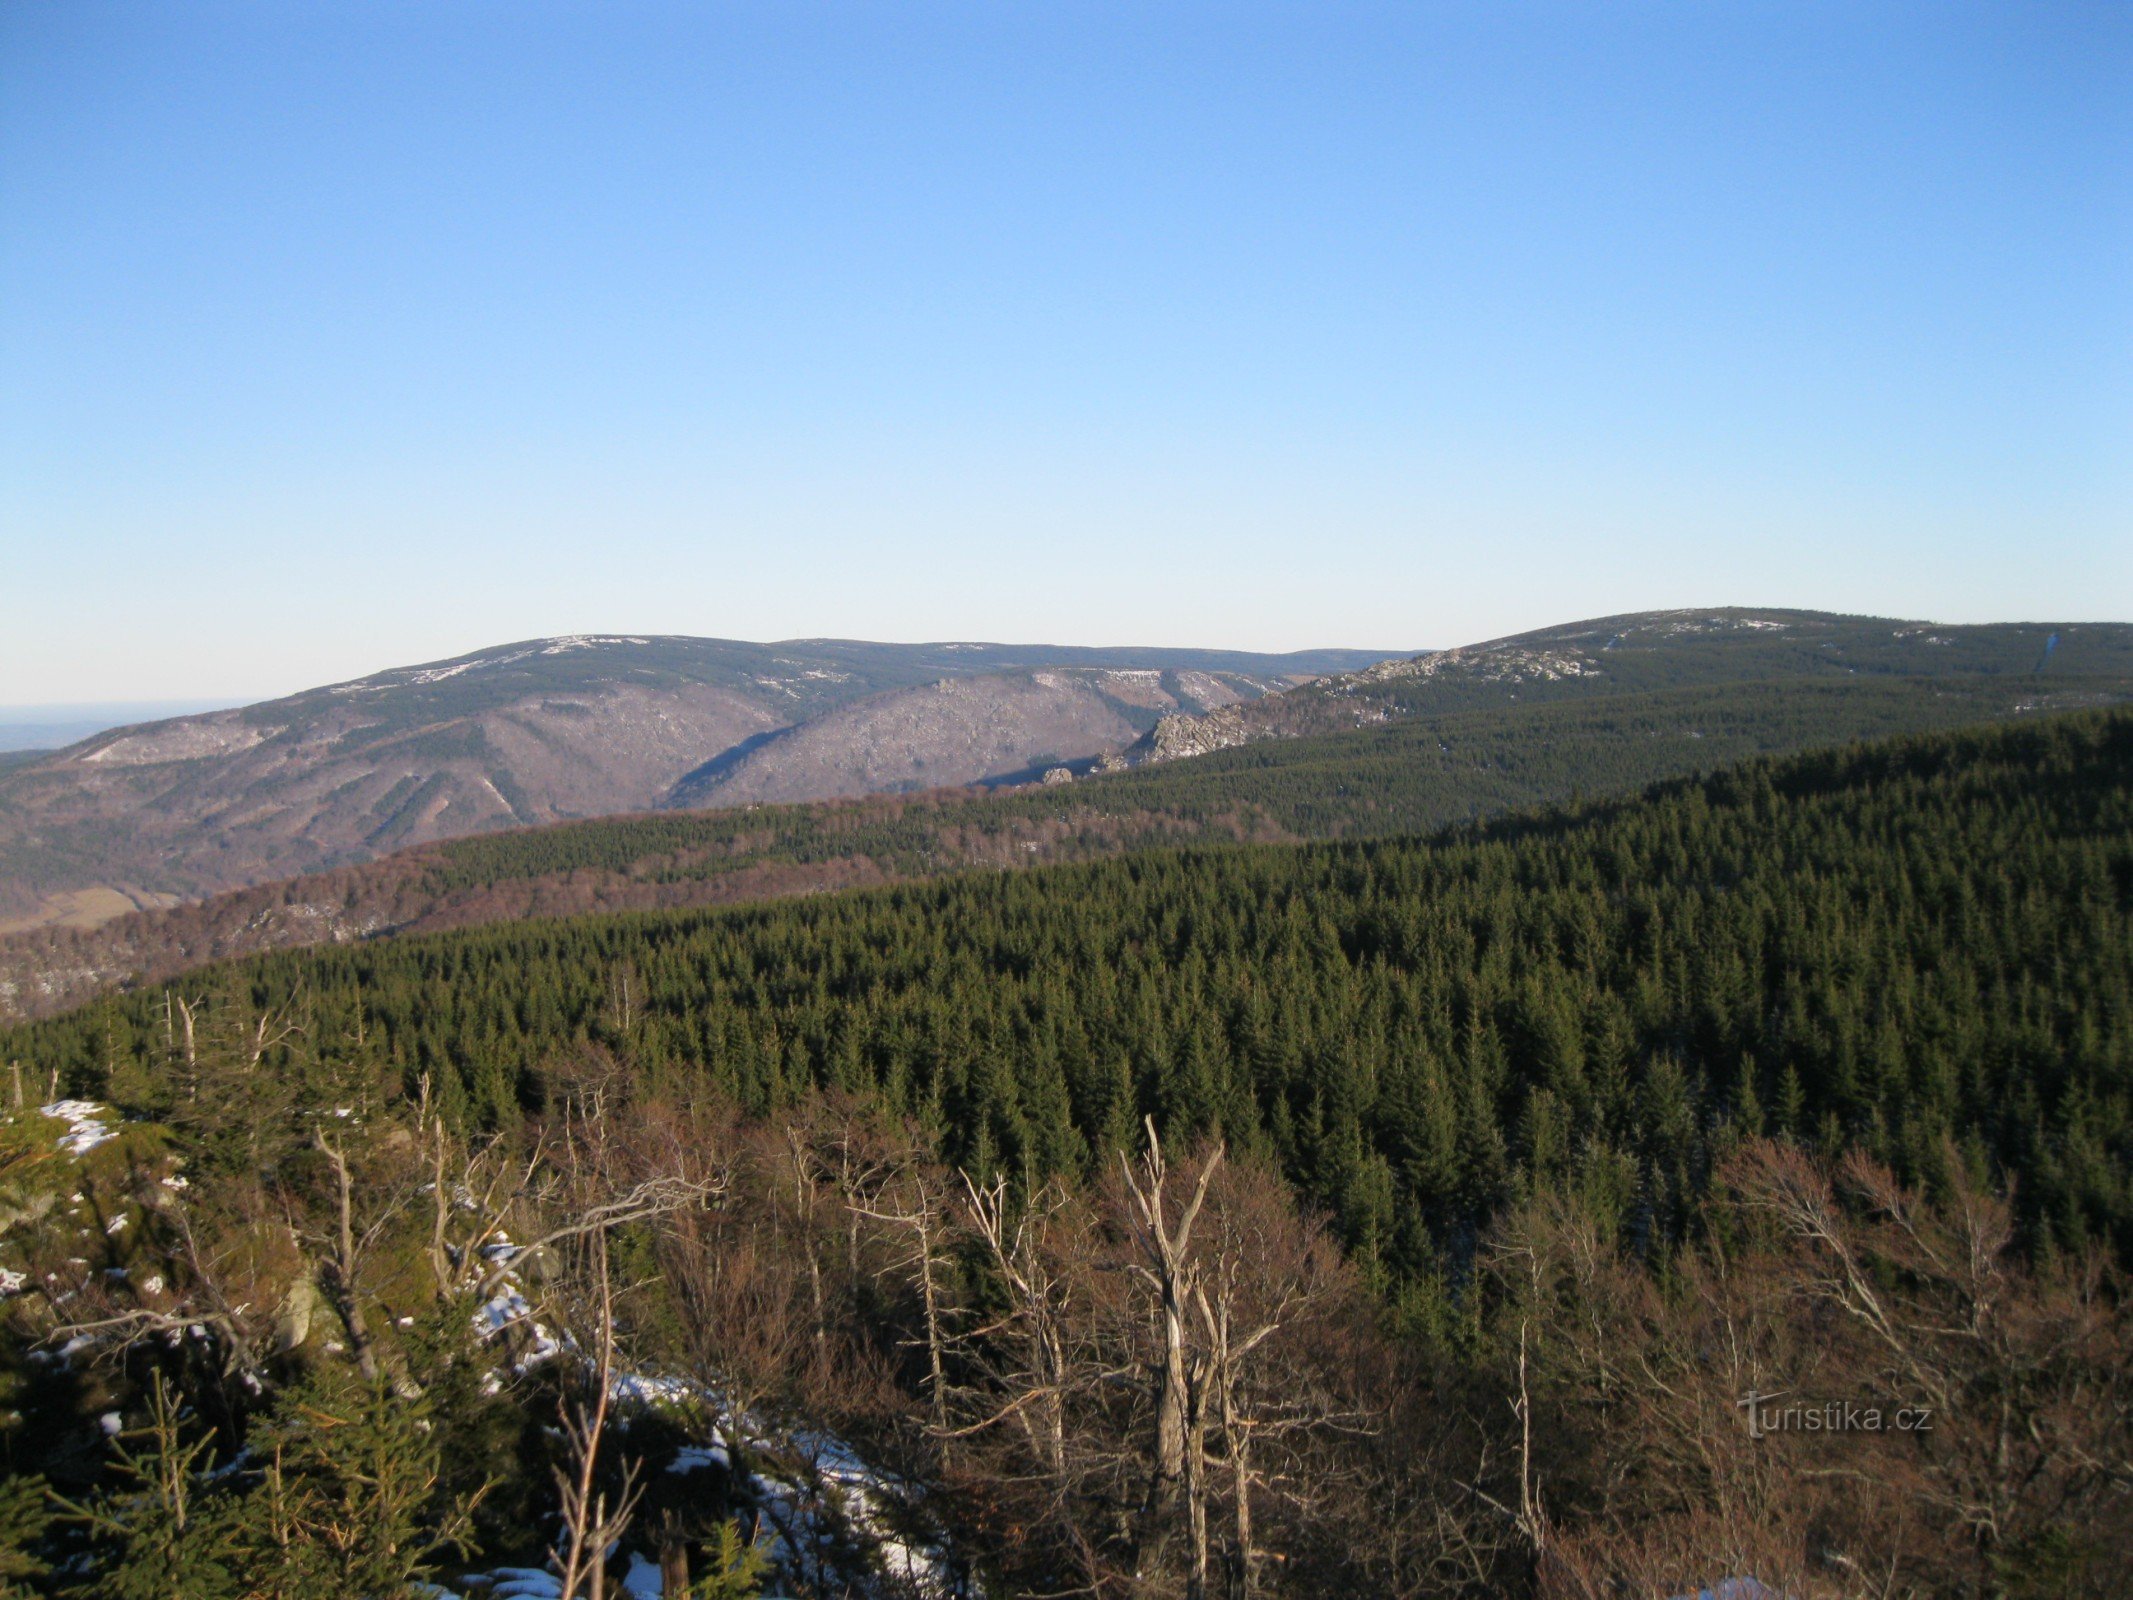 View of Smrk (the highest mountain in the Czech part of the Jizera Mountains).